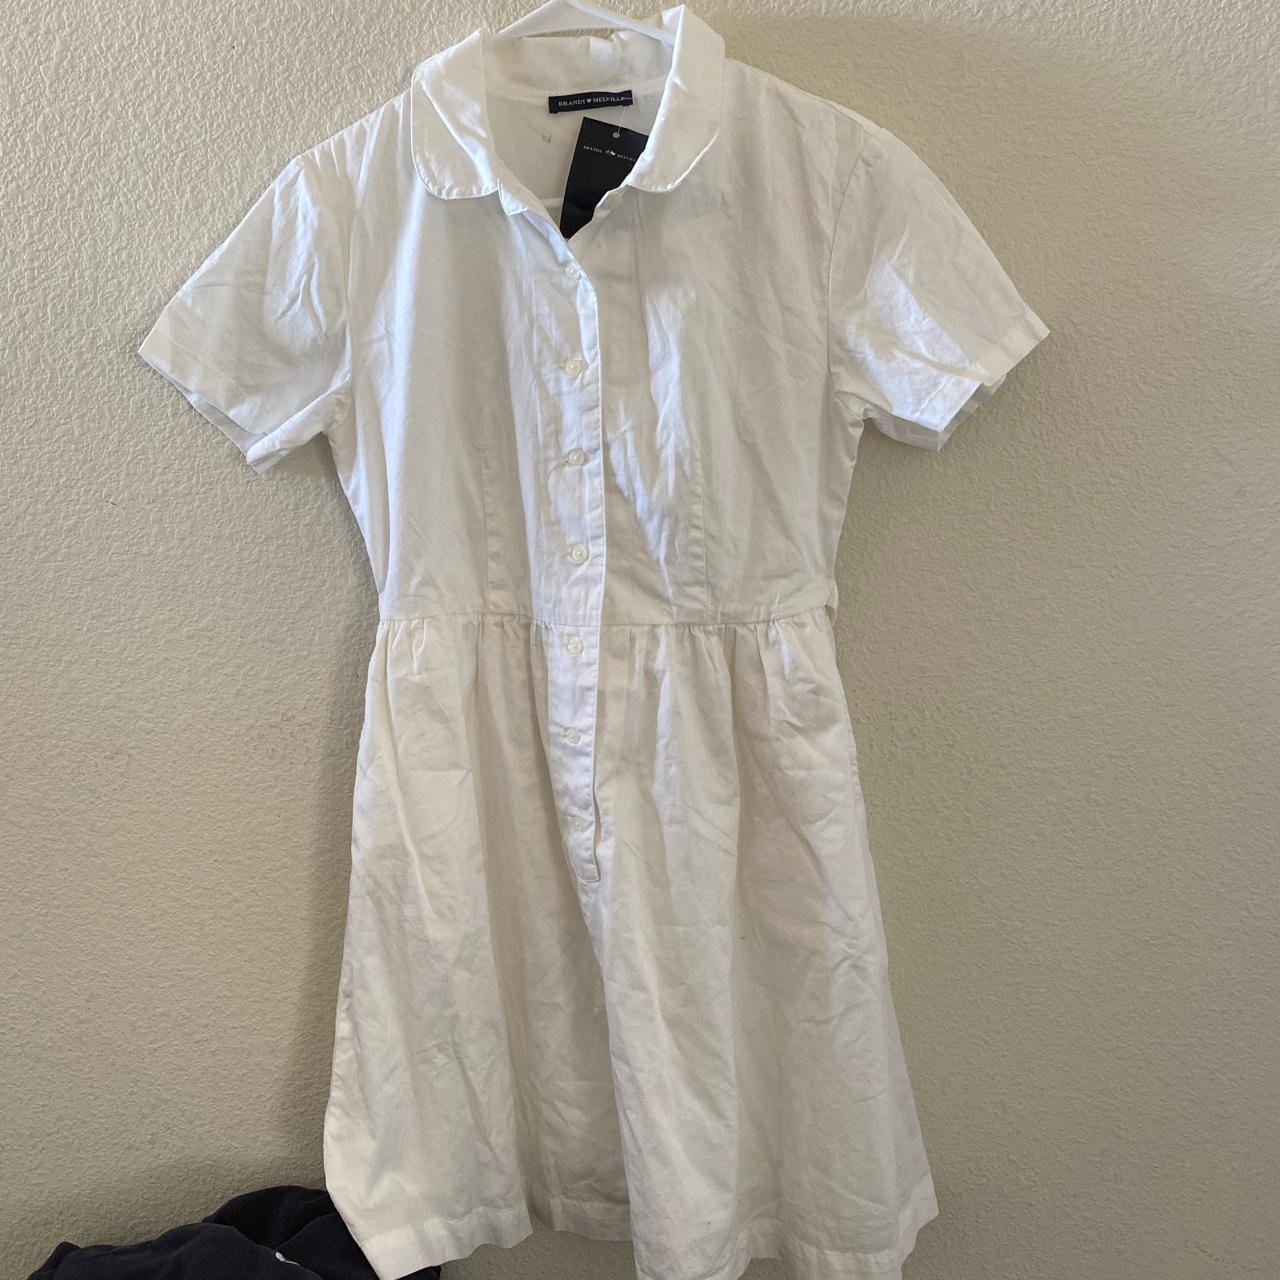 Brandy melville button down Gianna dress, There is a